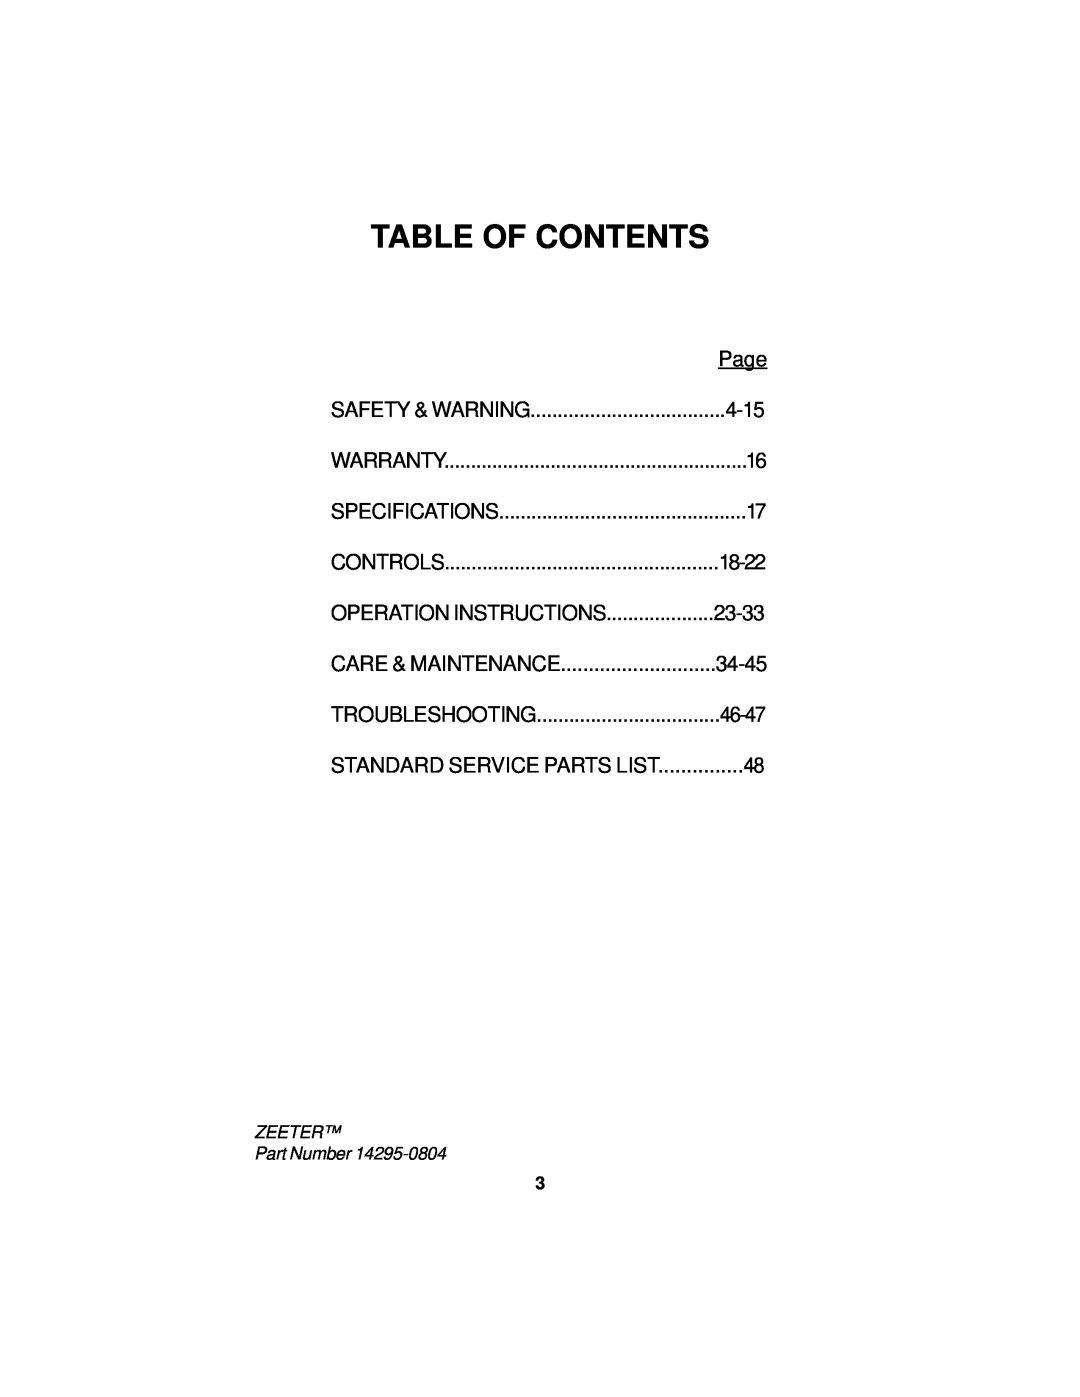 Dixon 14295-0804 Table Of Contents, Safety & Warning, Controls, 18-22, 23-33, Care & Maintenance, Troubleshooting, 46-47 